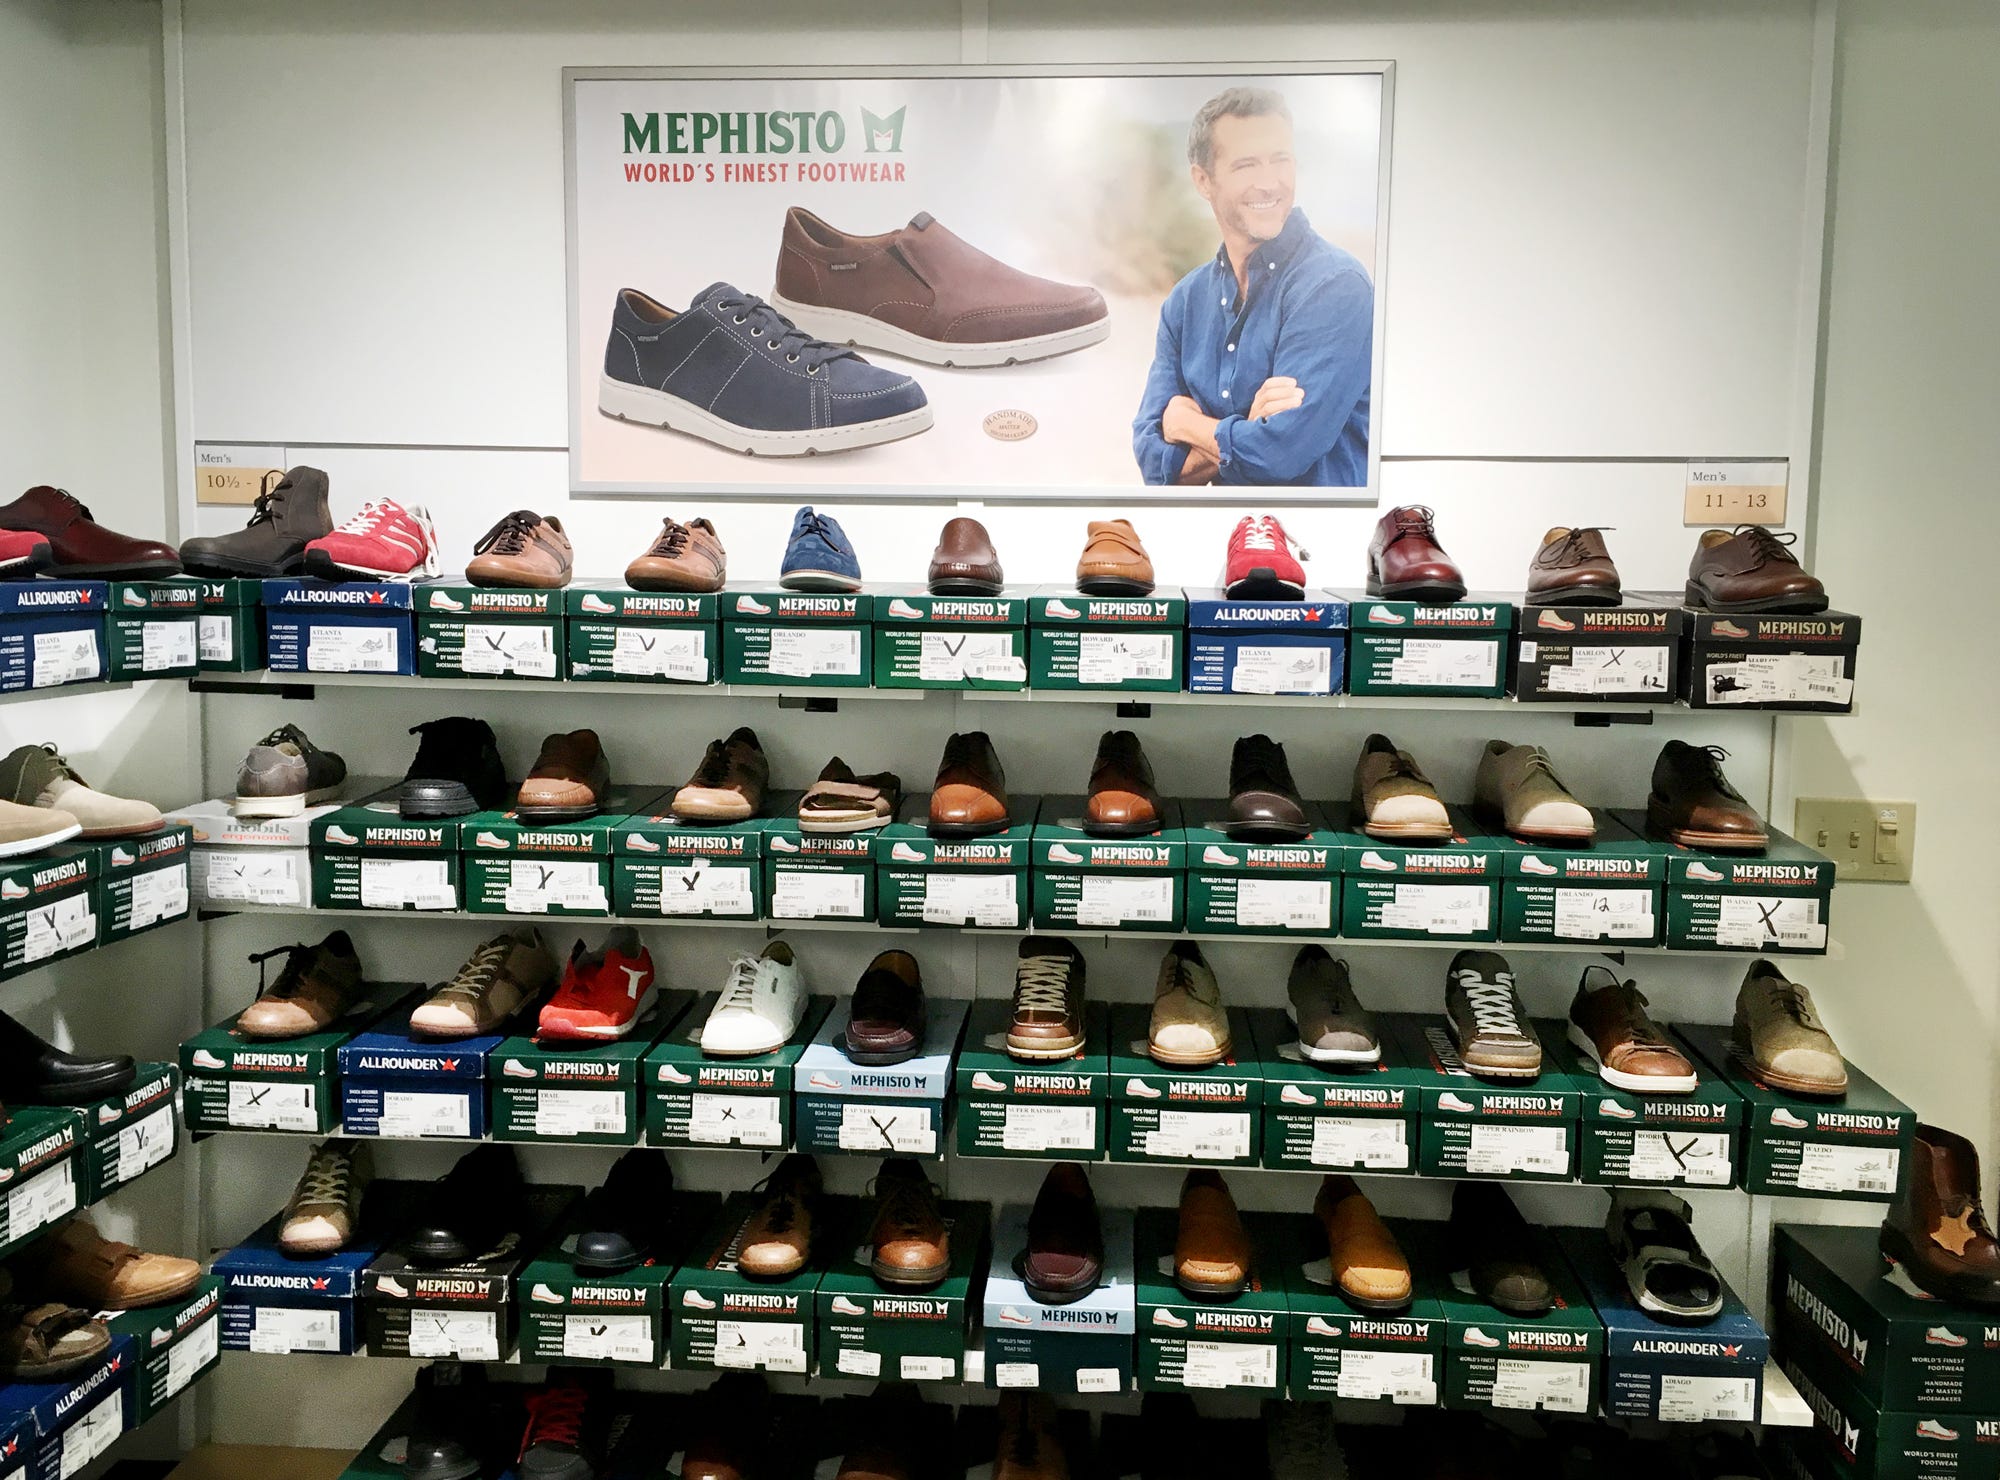 Mephisto shoe outlet in Franklin offers 